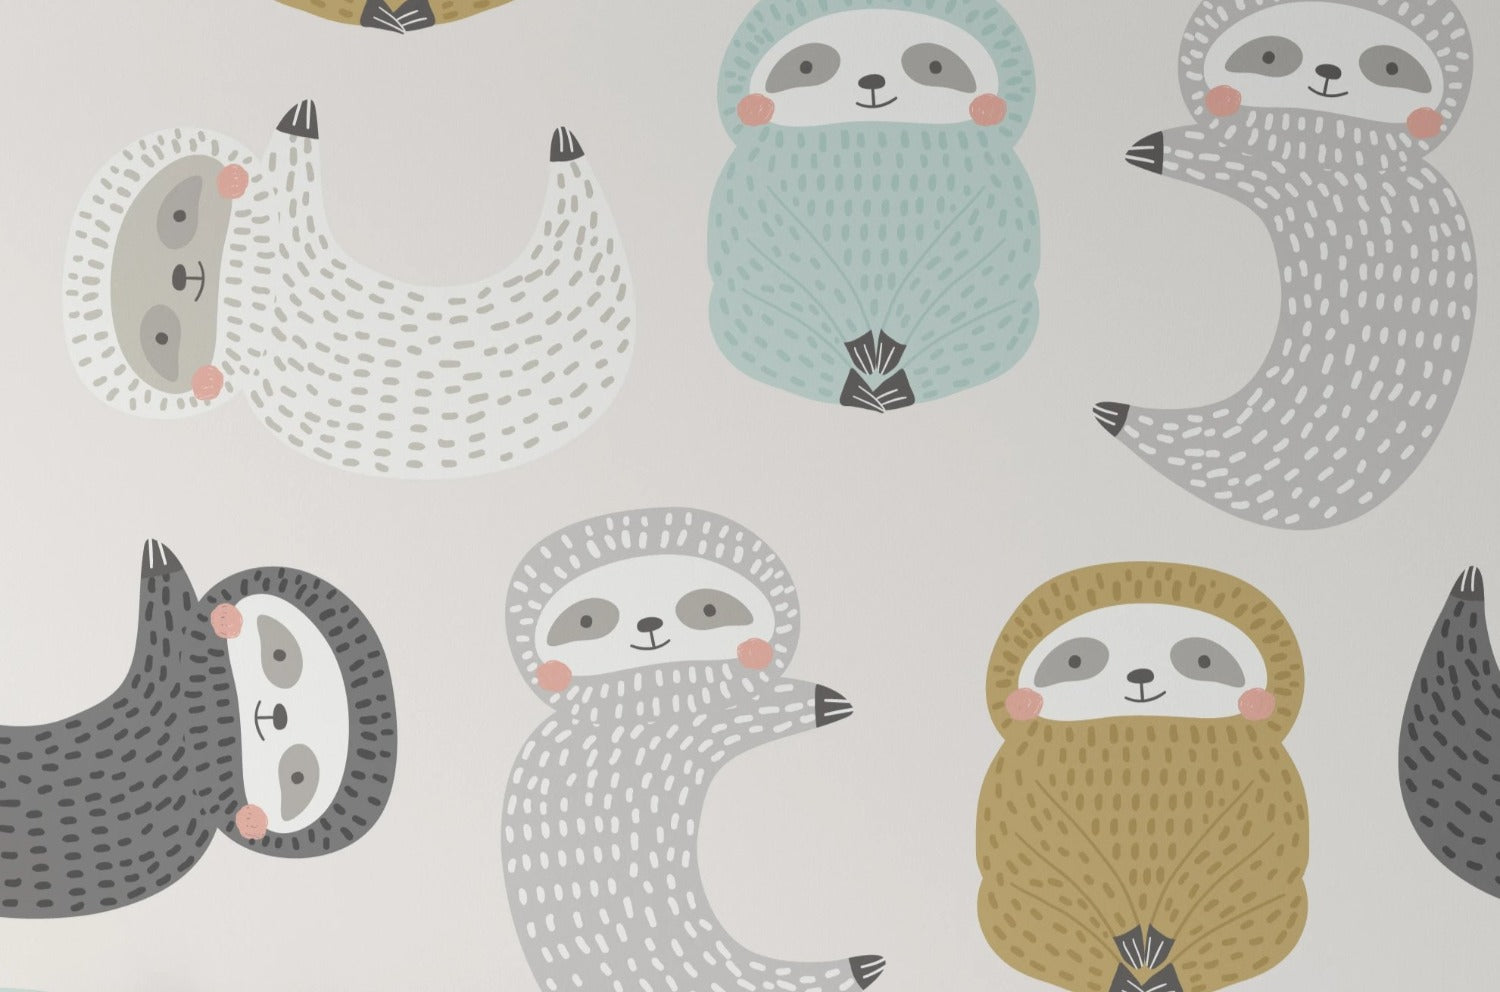 A close-up view of the "Sleepy Sloths Wallpaper", highlighting the gentle and soft color palette and the detailed texture resembling fur on each sloth. The designs are placed against a clean, white background that enhances the calm and sleepy theme. The sloths appear in a repeating pattern, each with a unique pose and expression, creating an overall effect that is both soothing and charming.